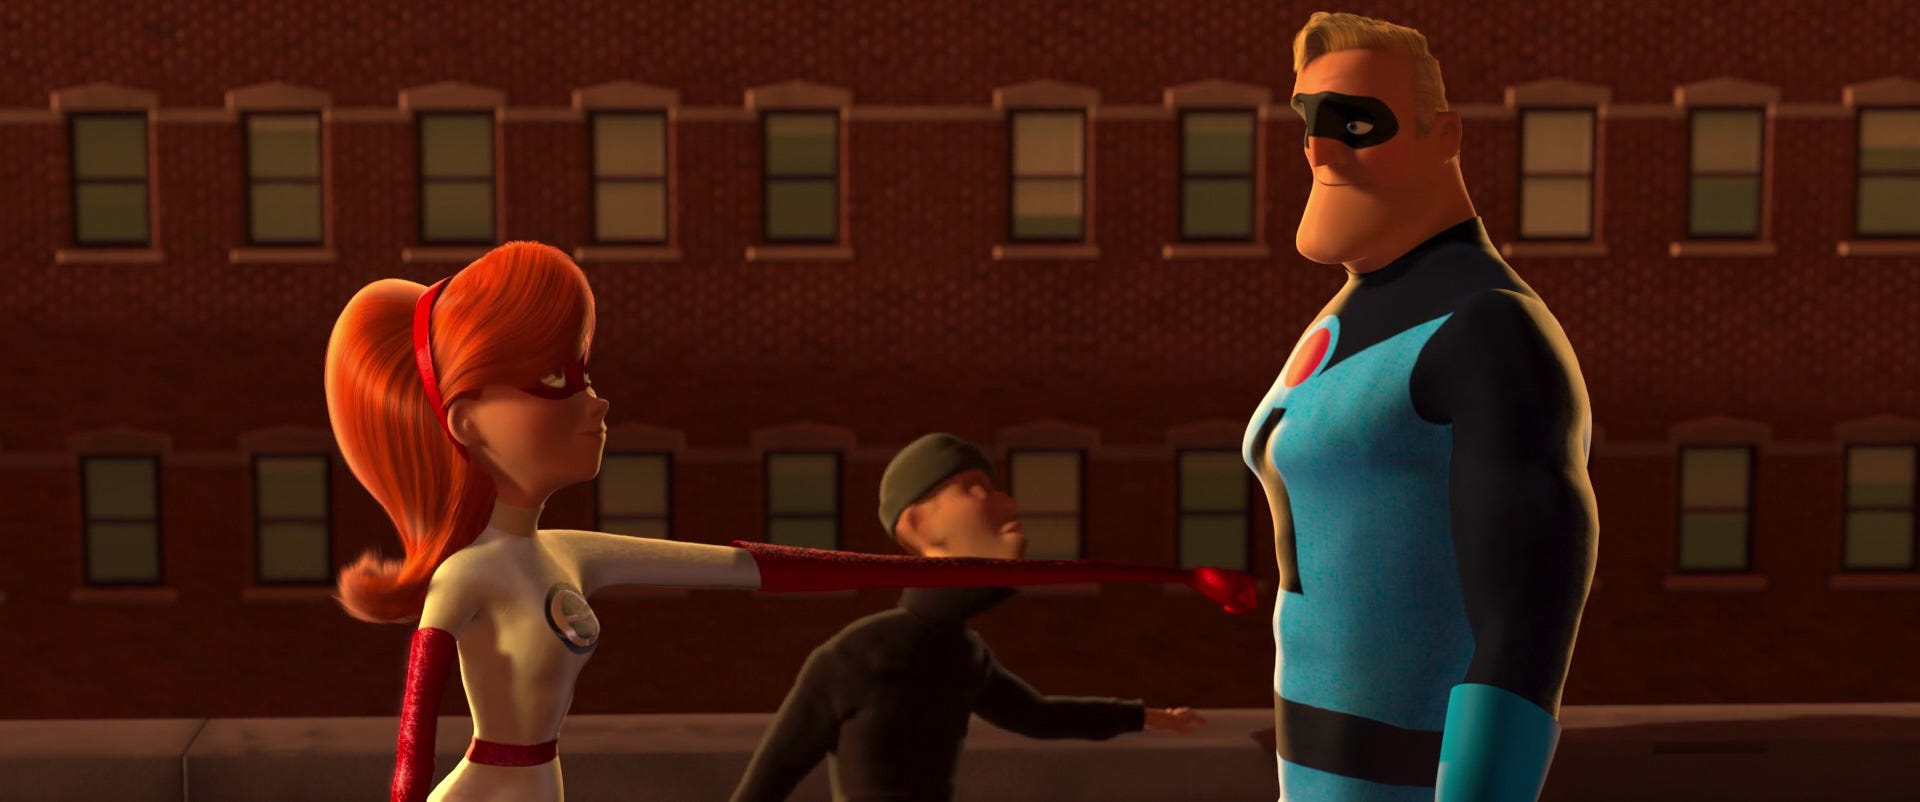 1920px x 802px - The Defining Images of 2004's 'The Incredibles' | by Lucien WD | Luwd Media  | Medium